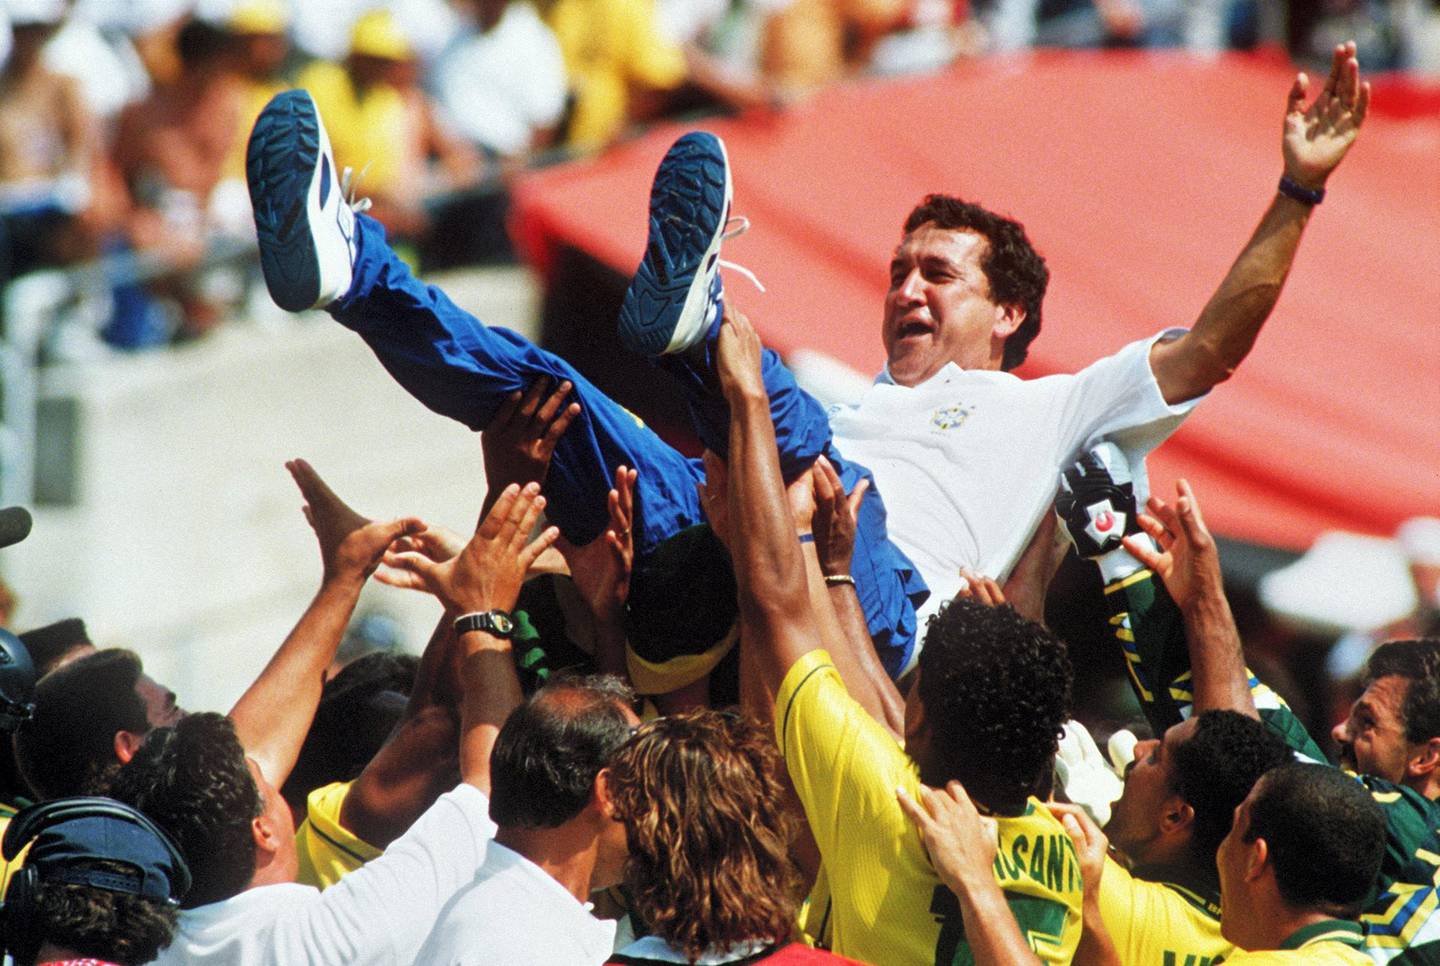 Brazilian coach Carlos Parreira is thrown up in the air by his players after Brazil defeated Italy 3-2 in the shoot-out session (0-0 after extra time) at the end of the World Cup final 17 July 1994 at he Rose Bowl in Pasadena. AFP PHOTO/GABRIEL BOUYS / AFP PHOTO / GABRIEL BOUYS